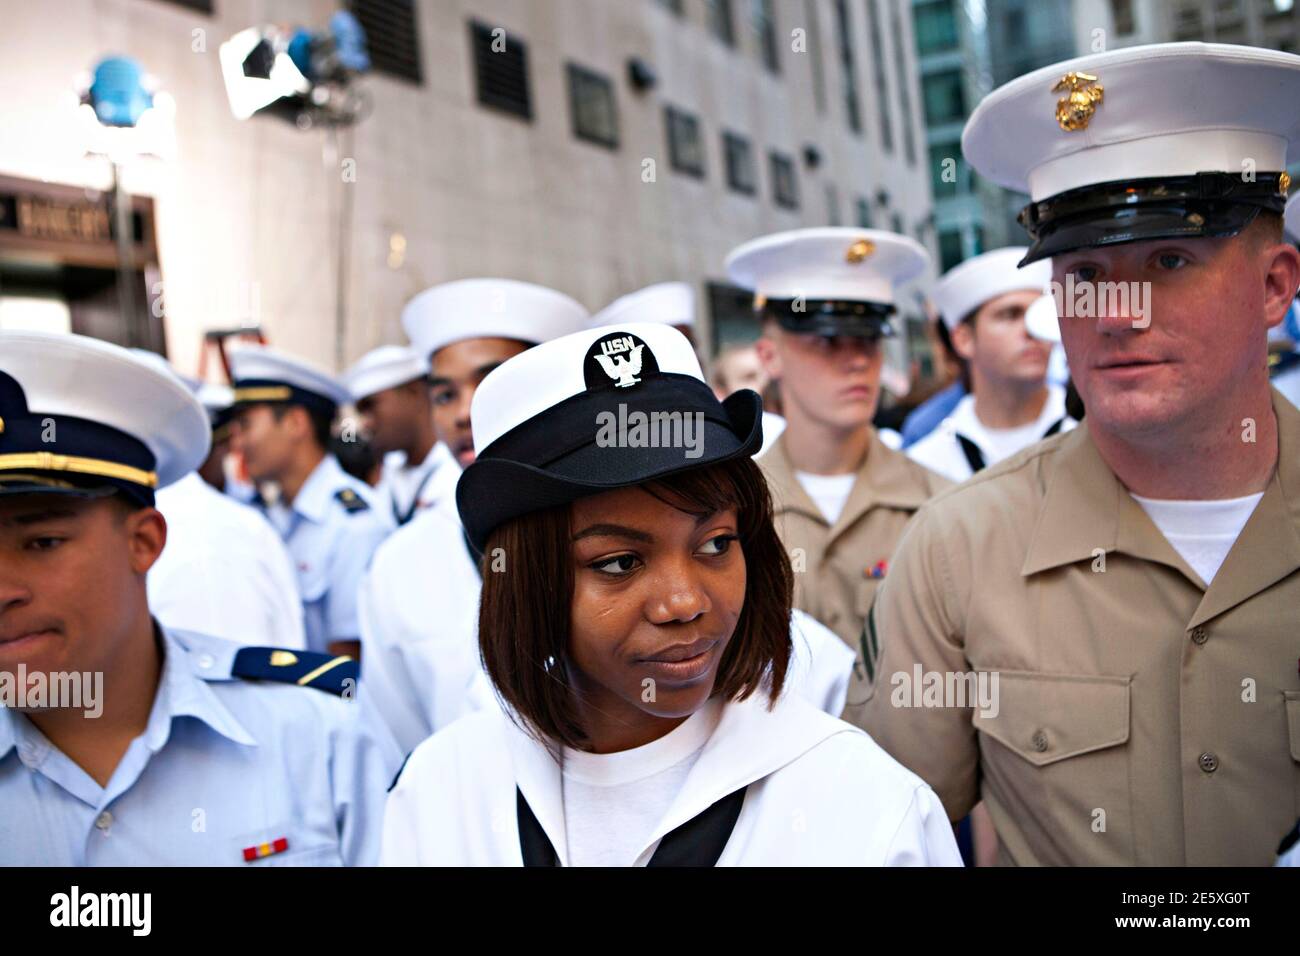 Aviation Ordnanceman second class (AO2) Tyesha Beal, of Norfolk, VA, waits for Singer Bobby Brown to perform on NBC's 'Today' show in New York, May 28, 2012.  REUTERS/Andrew Burton (UNITED STATES - Tags: MILITARY ENTERTAINMENT) Stock Photo